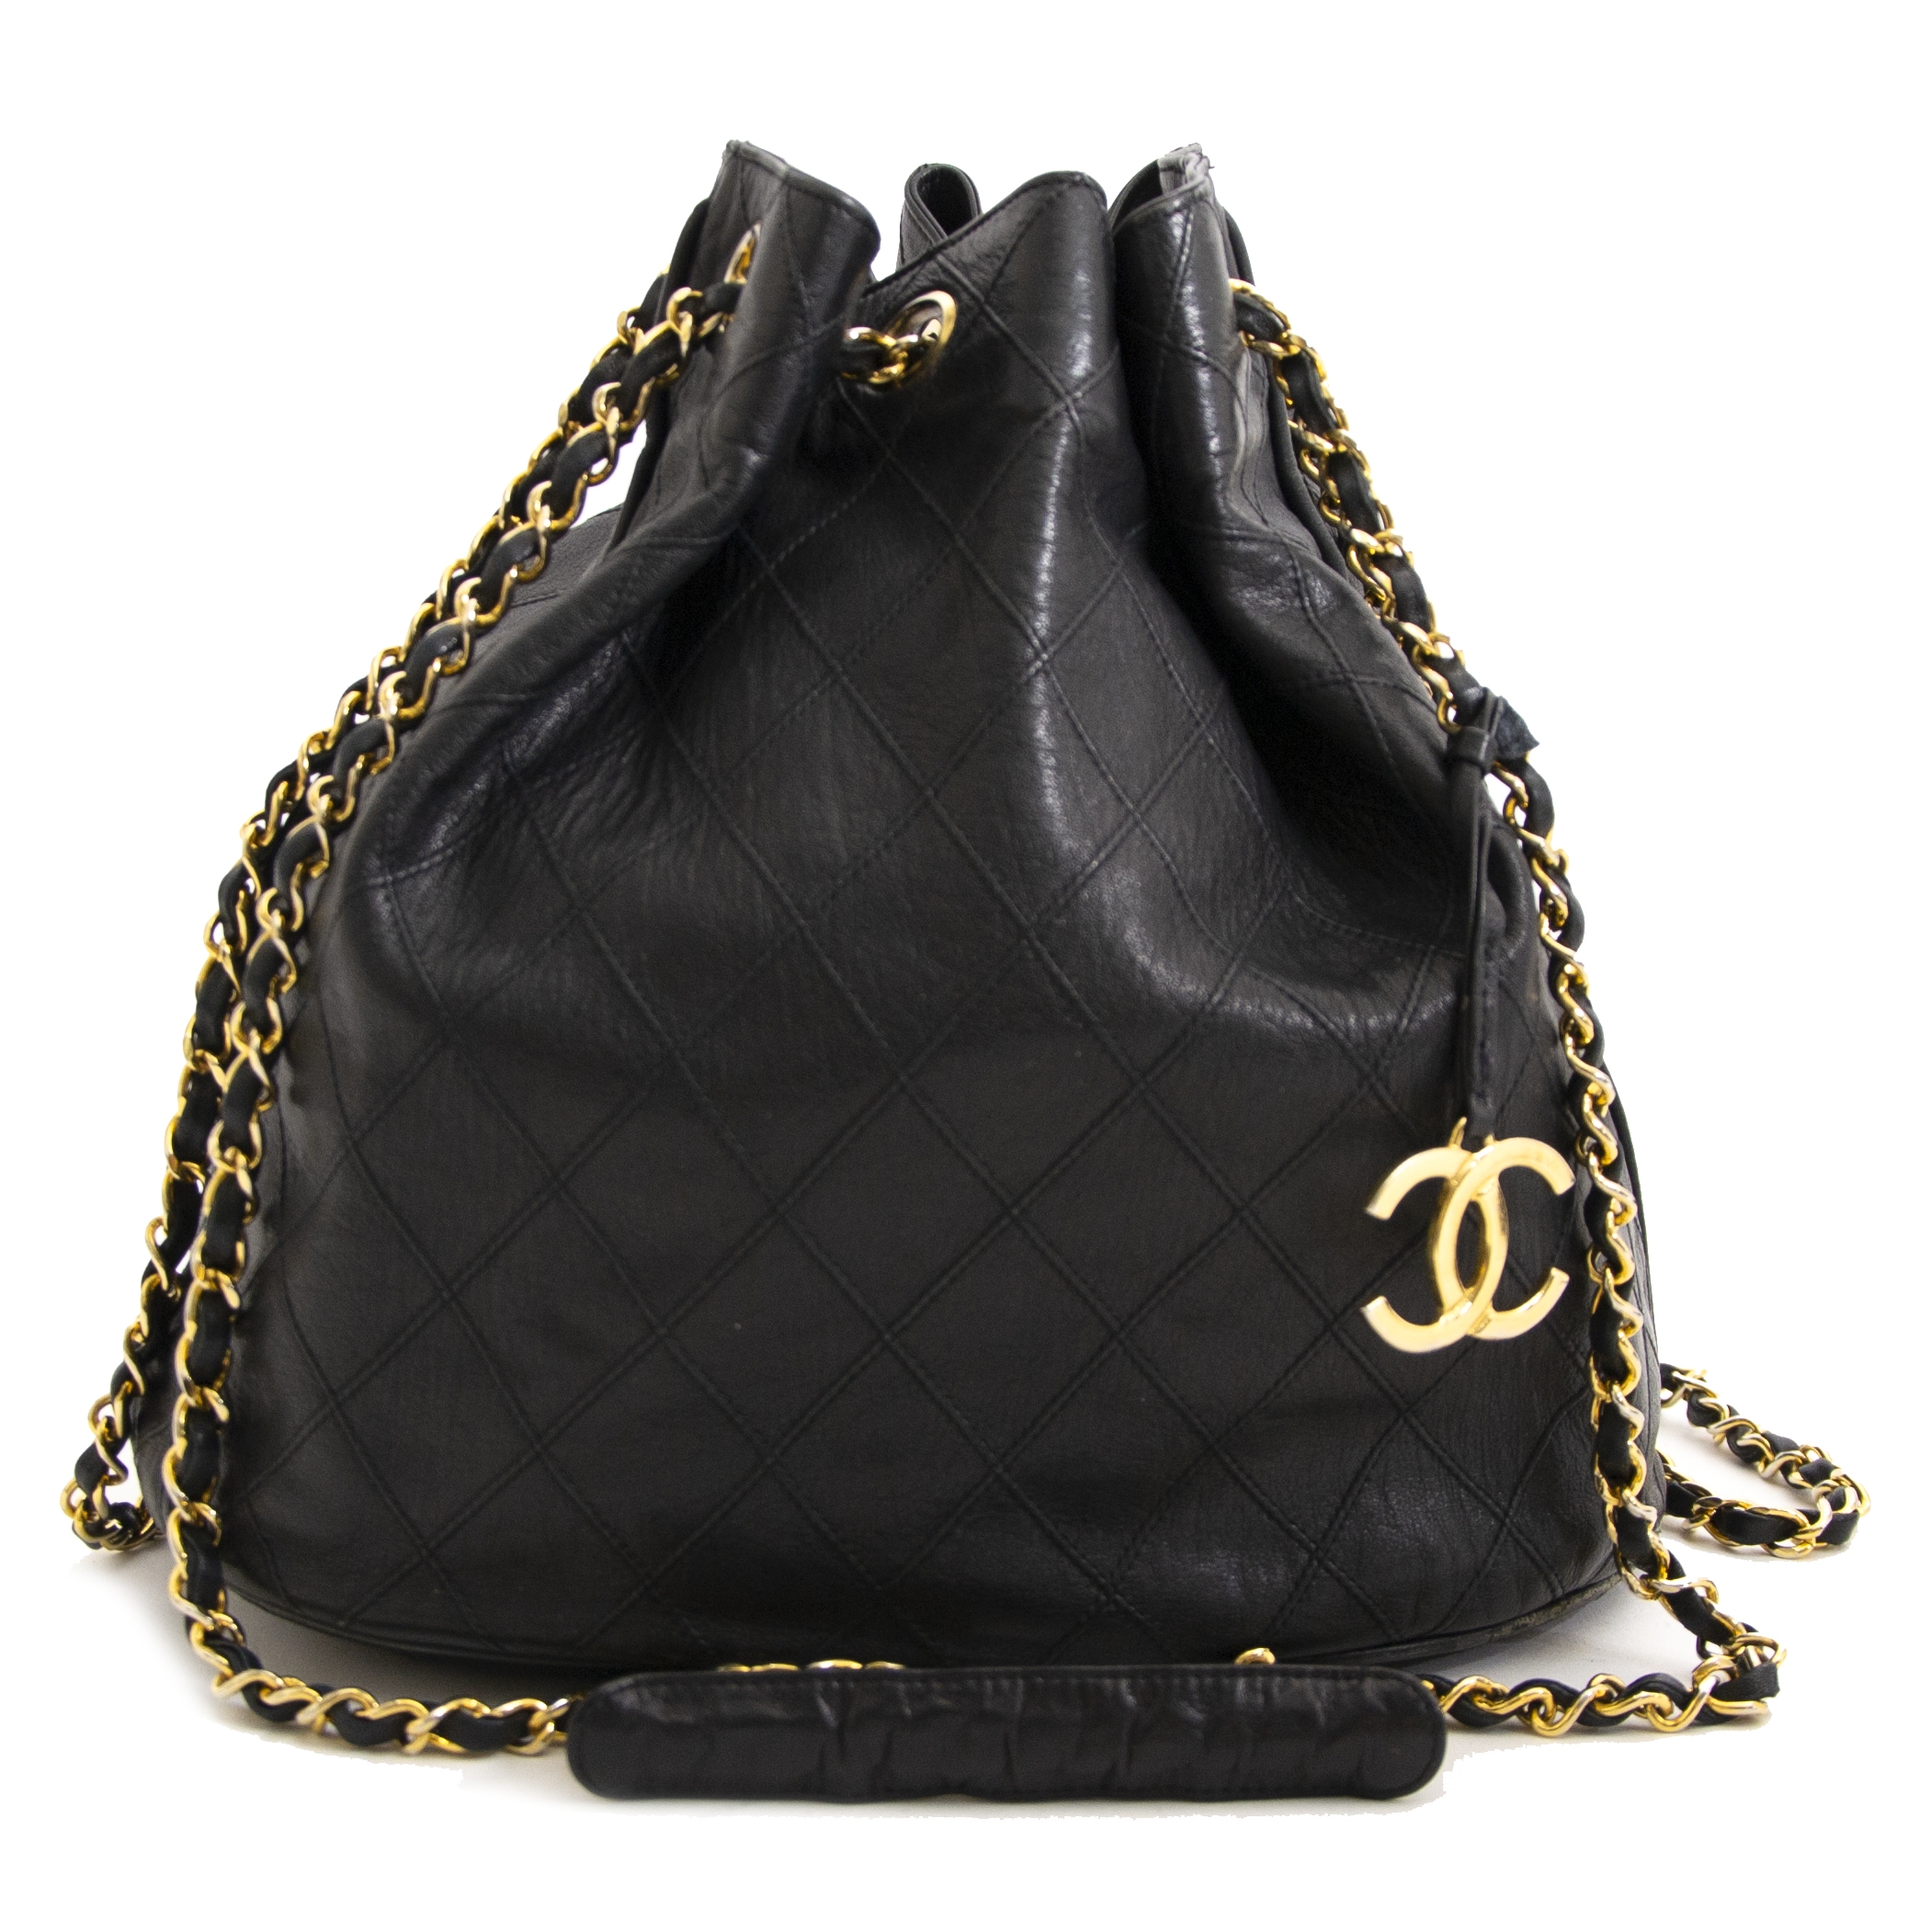 Chanel black bucket bag with logo on the front and gold detail - 1980s second  hand Lysis